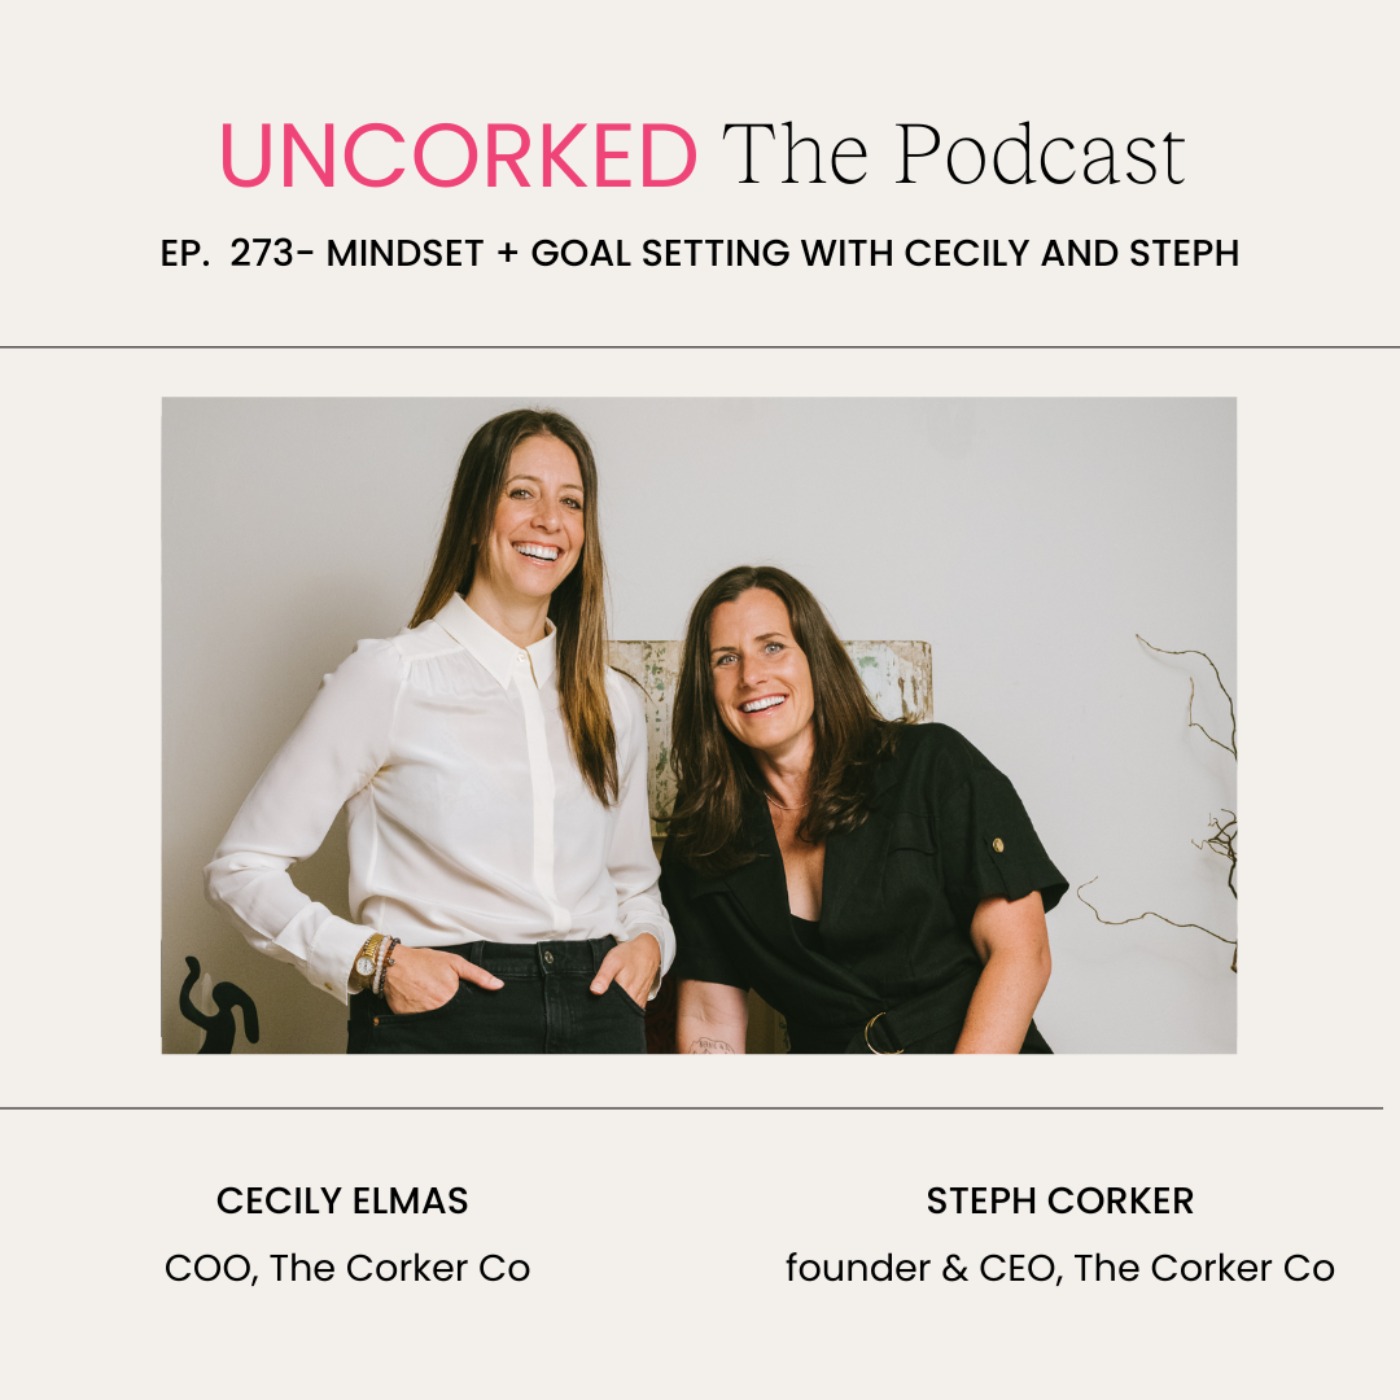 Mindset + Goal Setting with Cecily and Steph